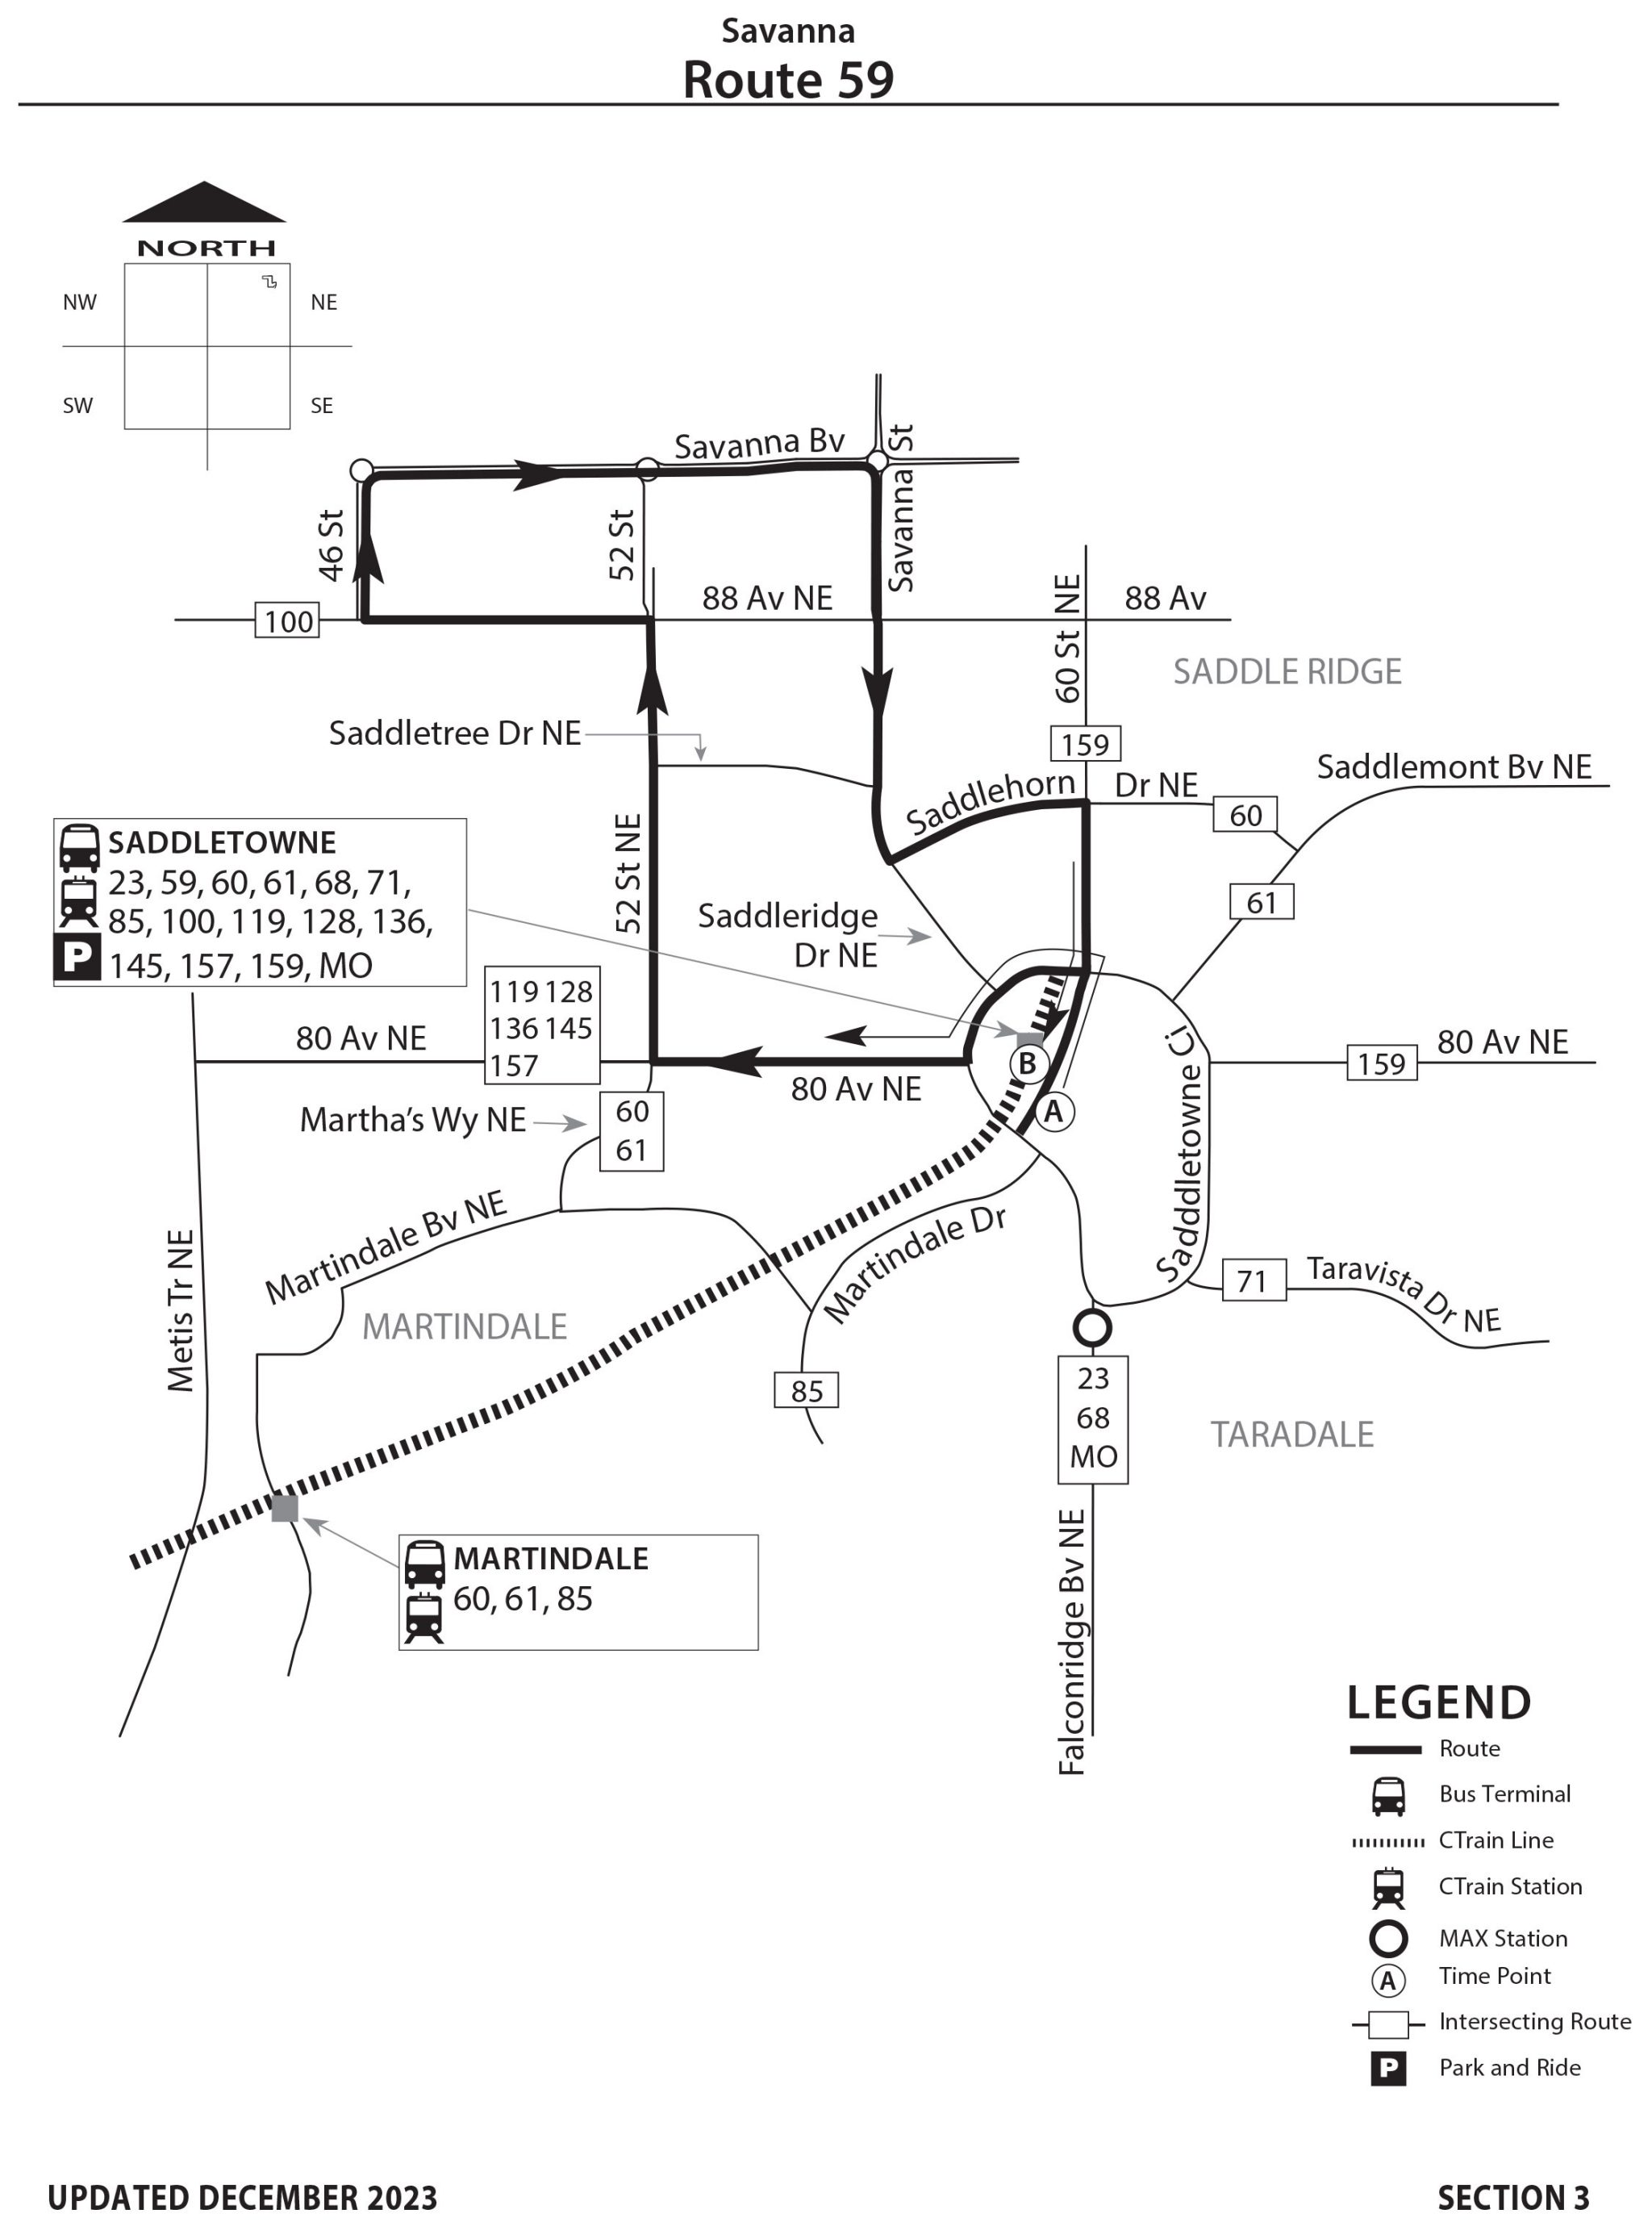 map of Route 59 as of 11/2023